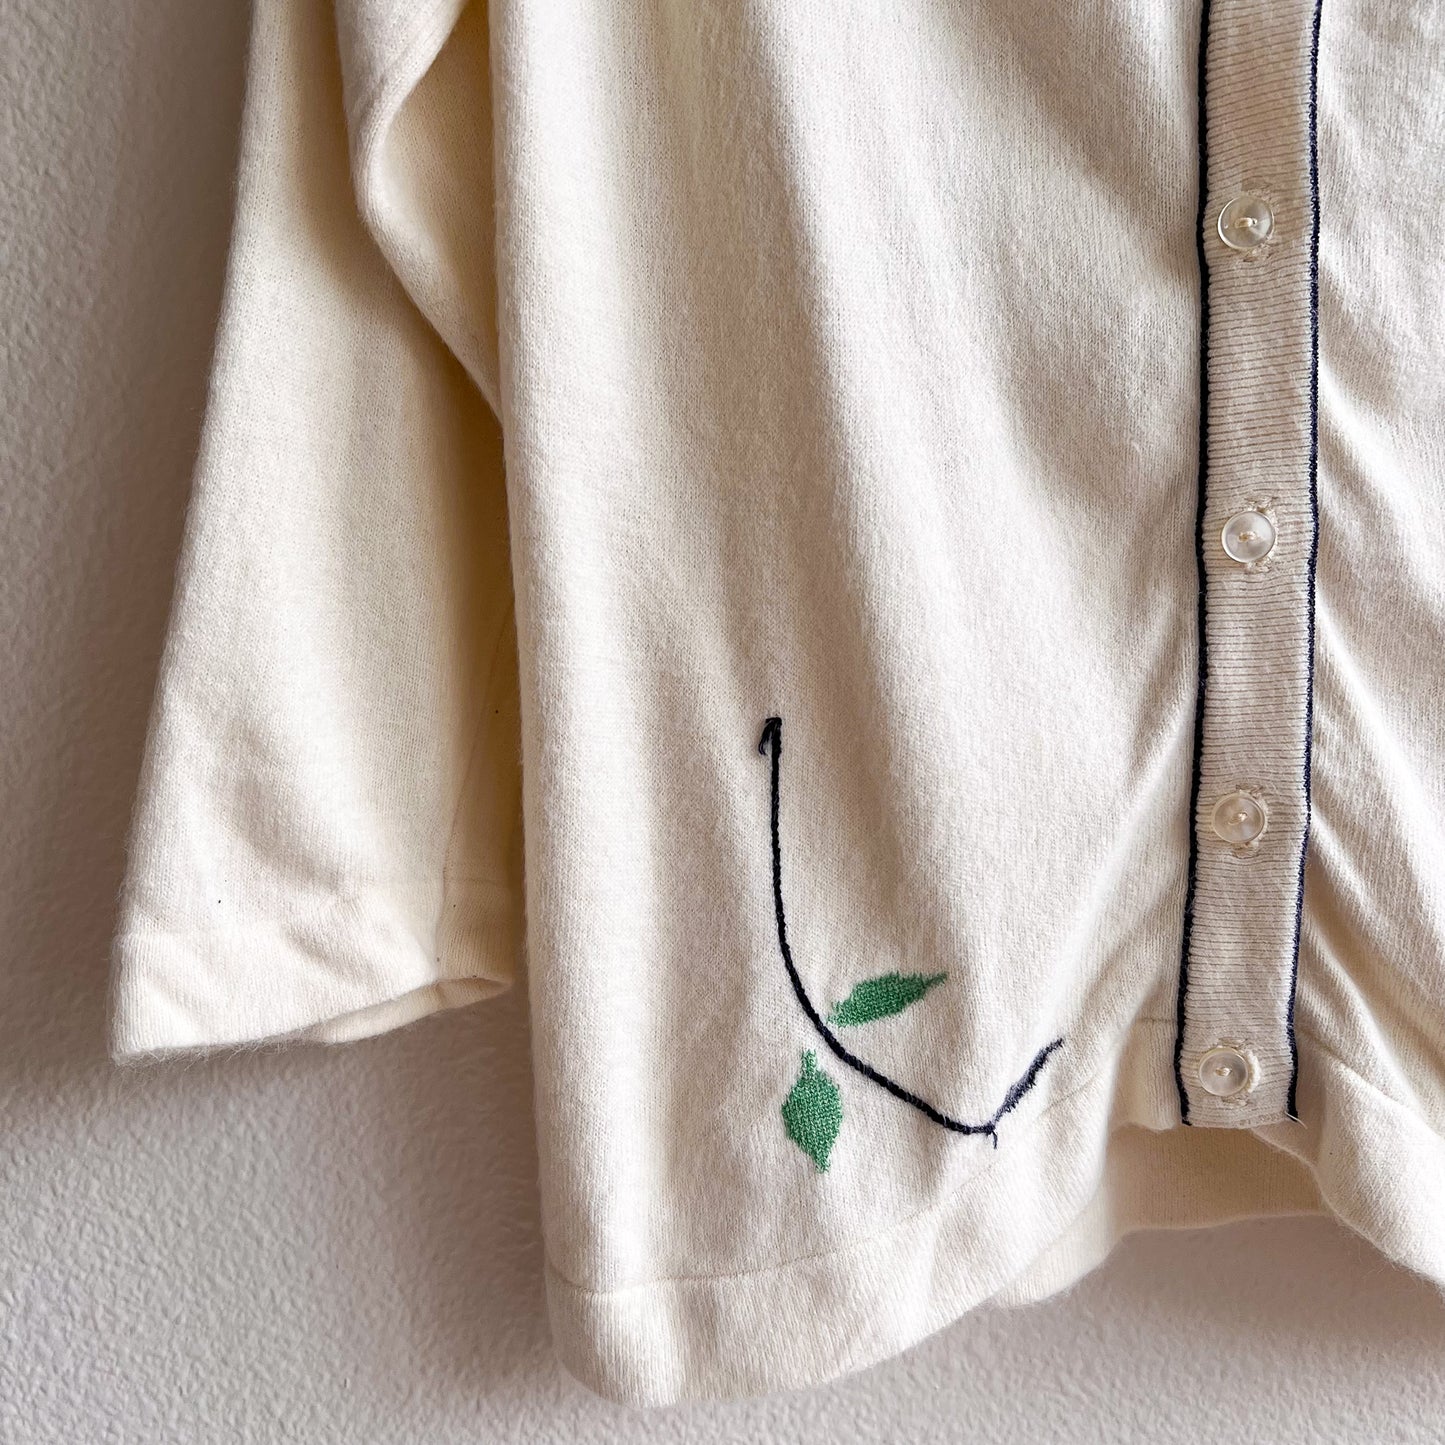 1950s White Cashmere Cardigan With Leaf Details (S/M)